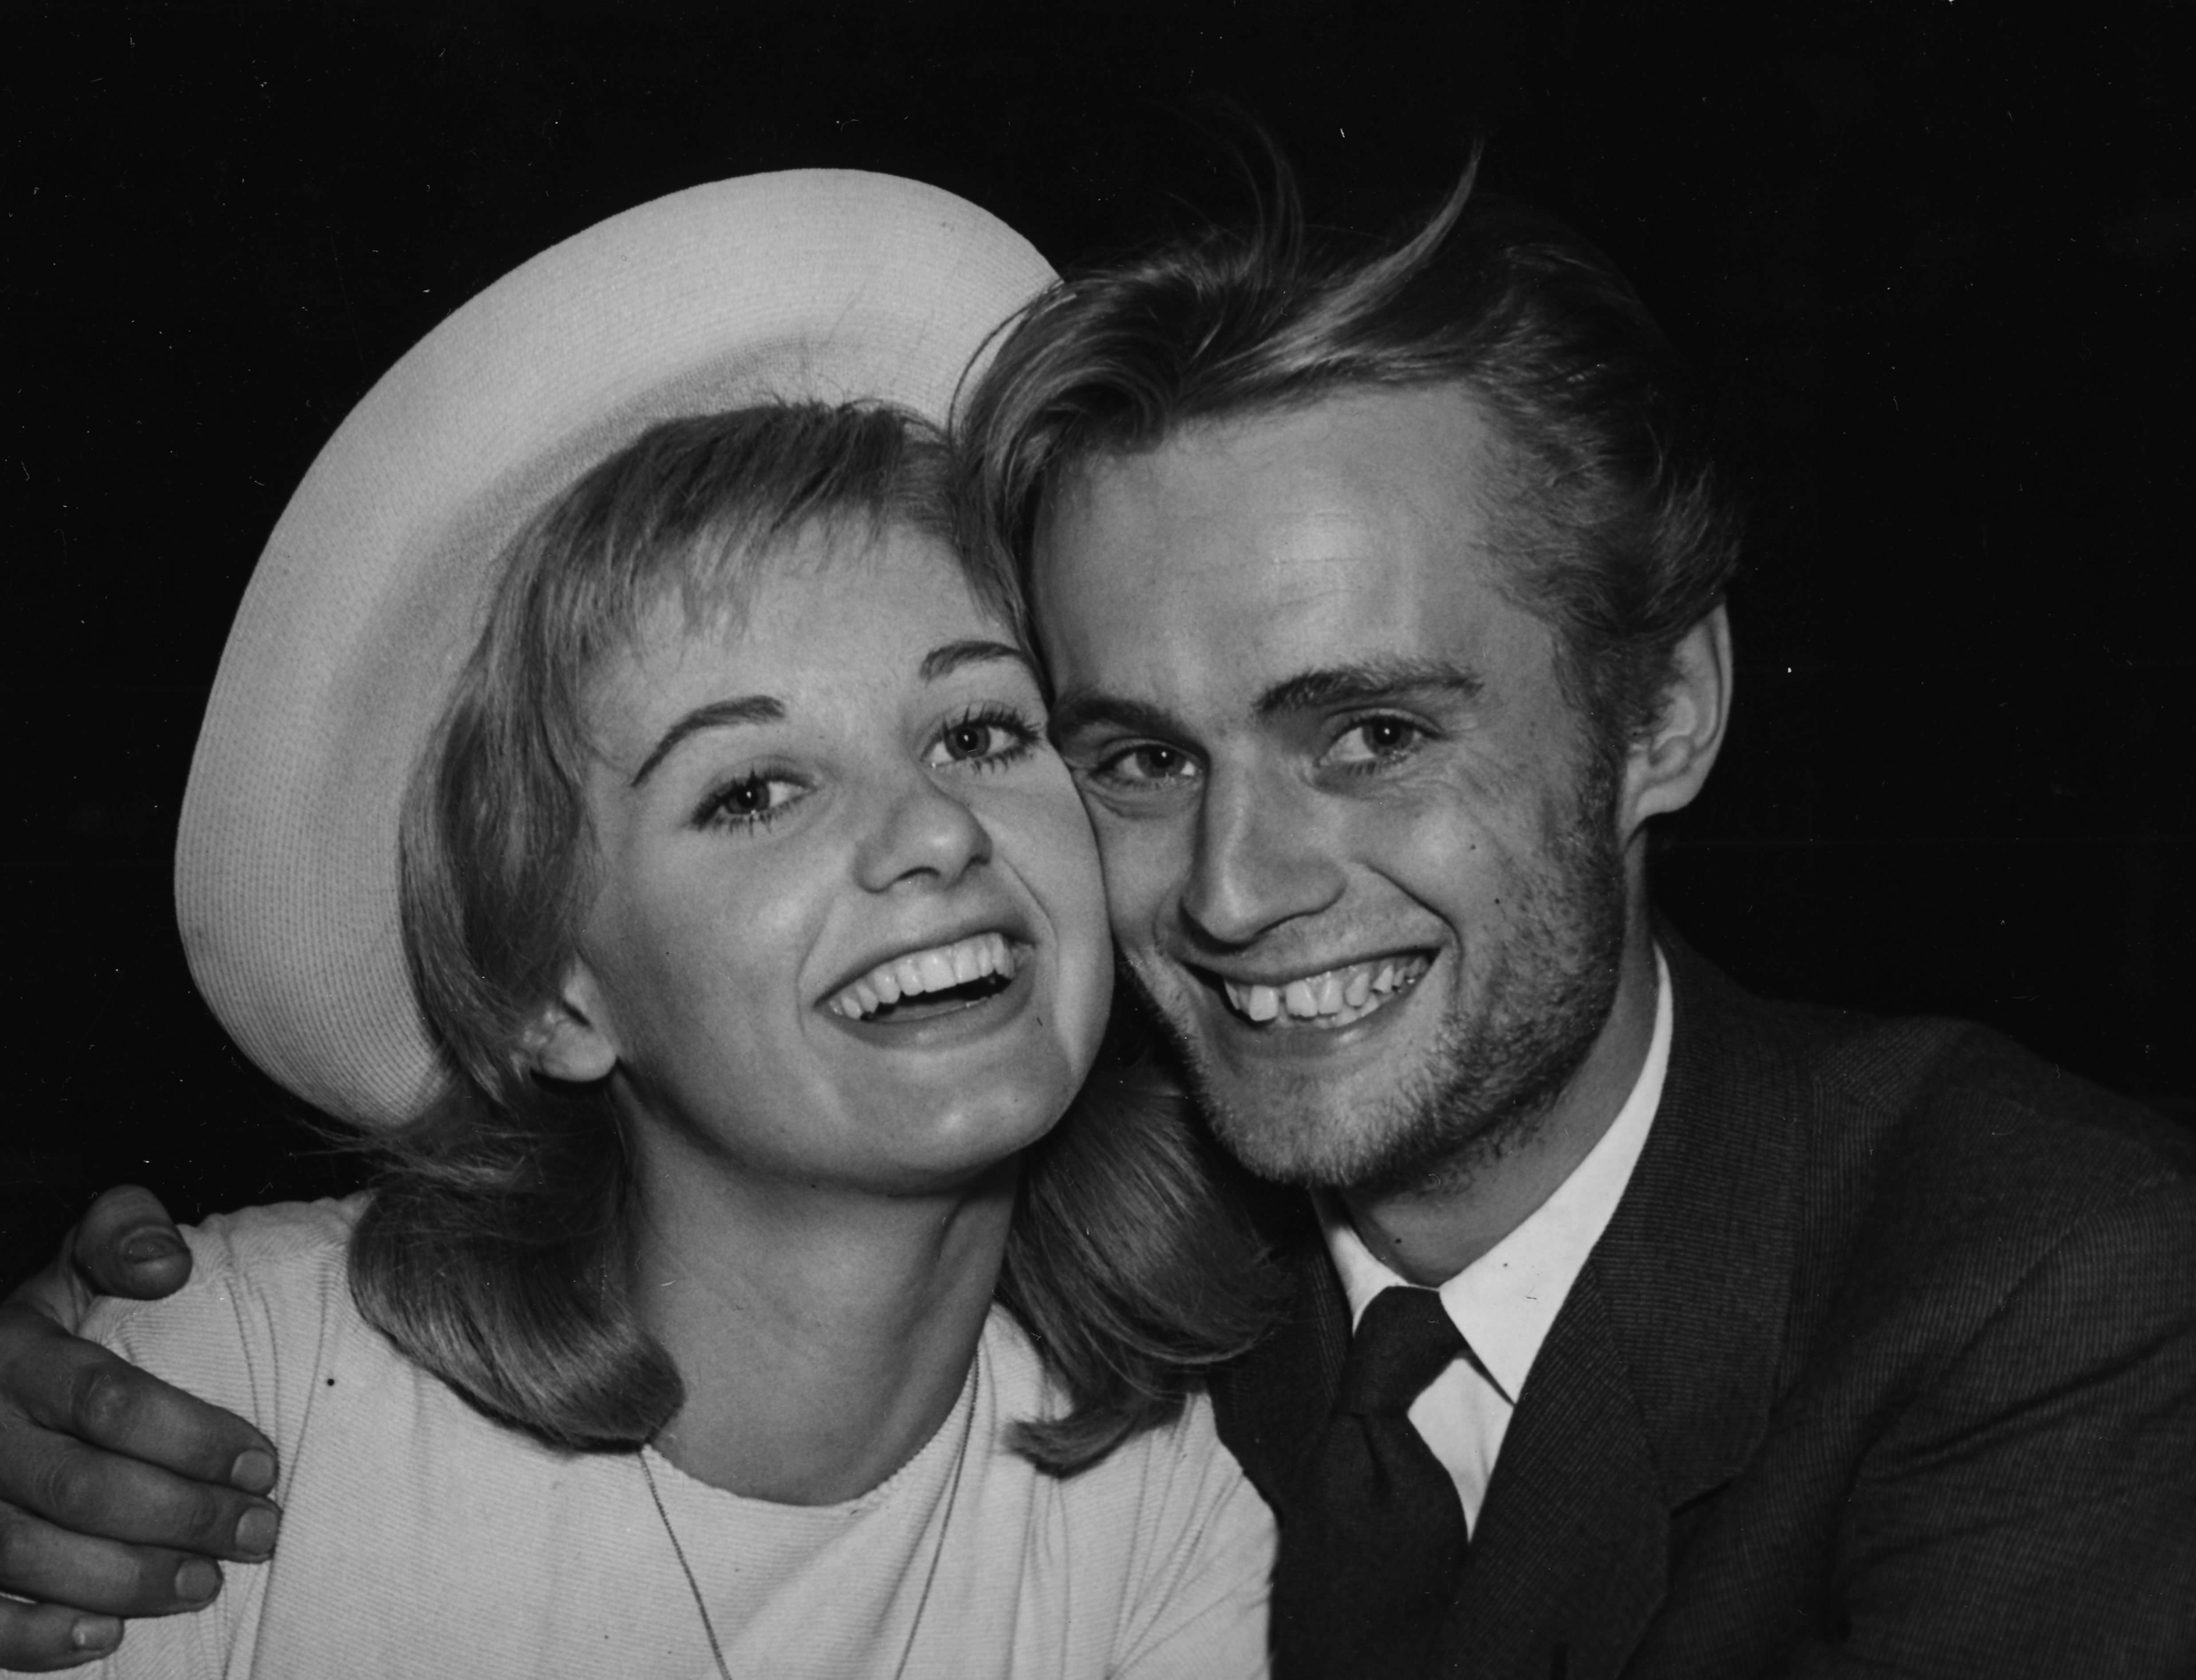 Jill Ireland and David McCallum smiling after their wedding at a registry office in London on May 13, 1957 | Source: Getty Images